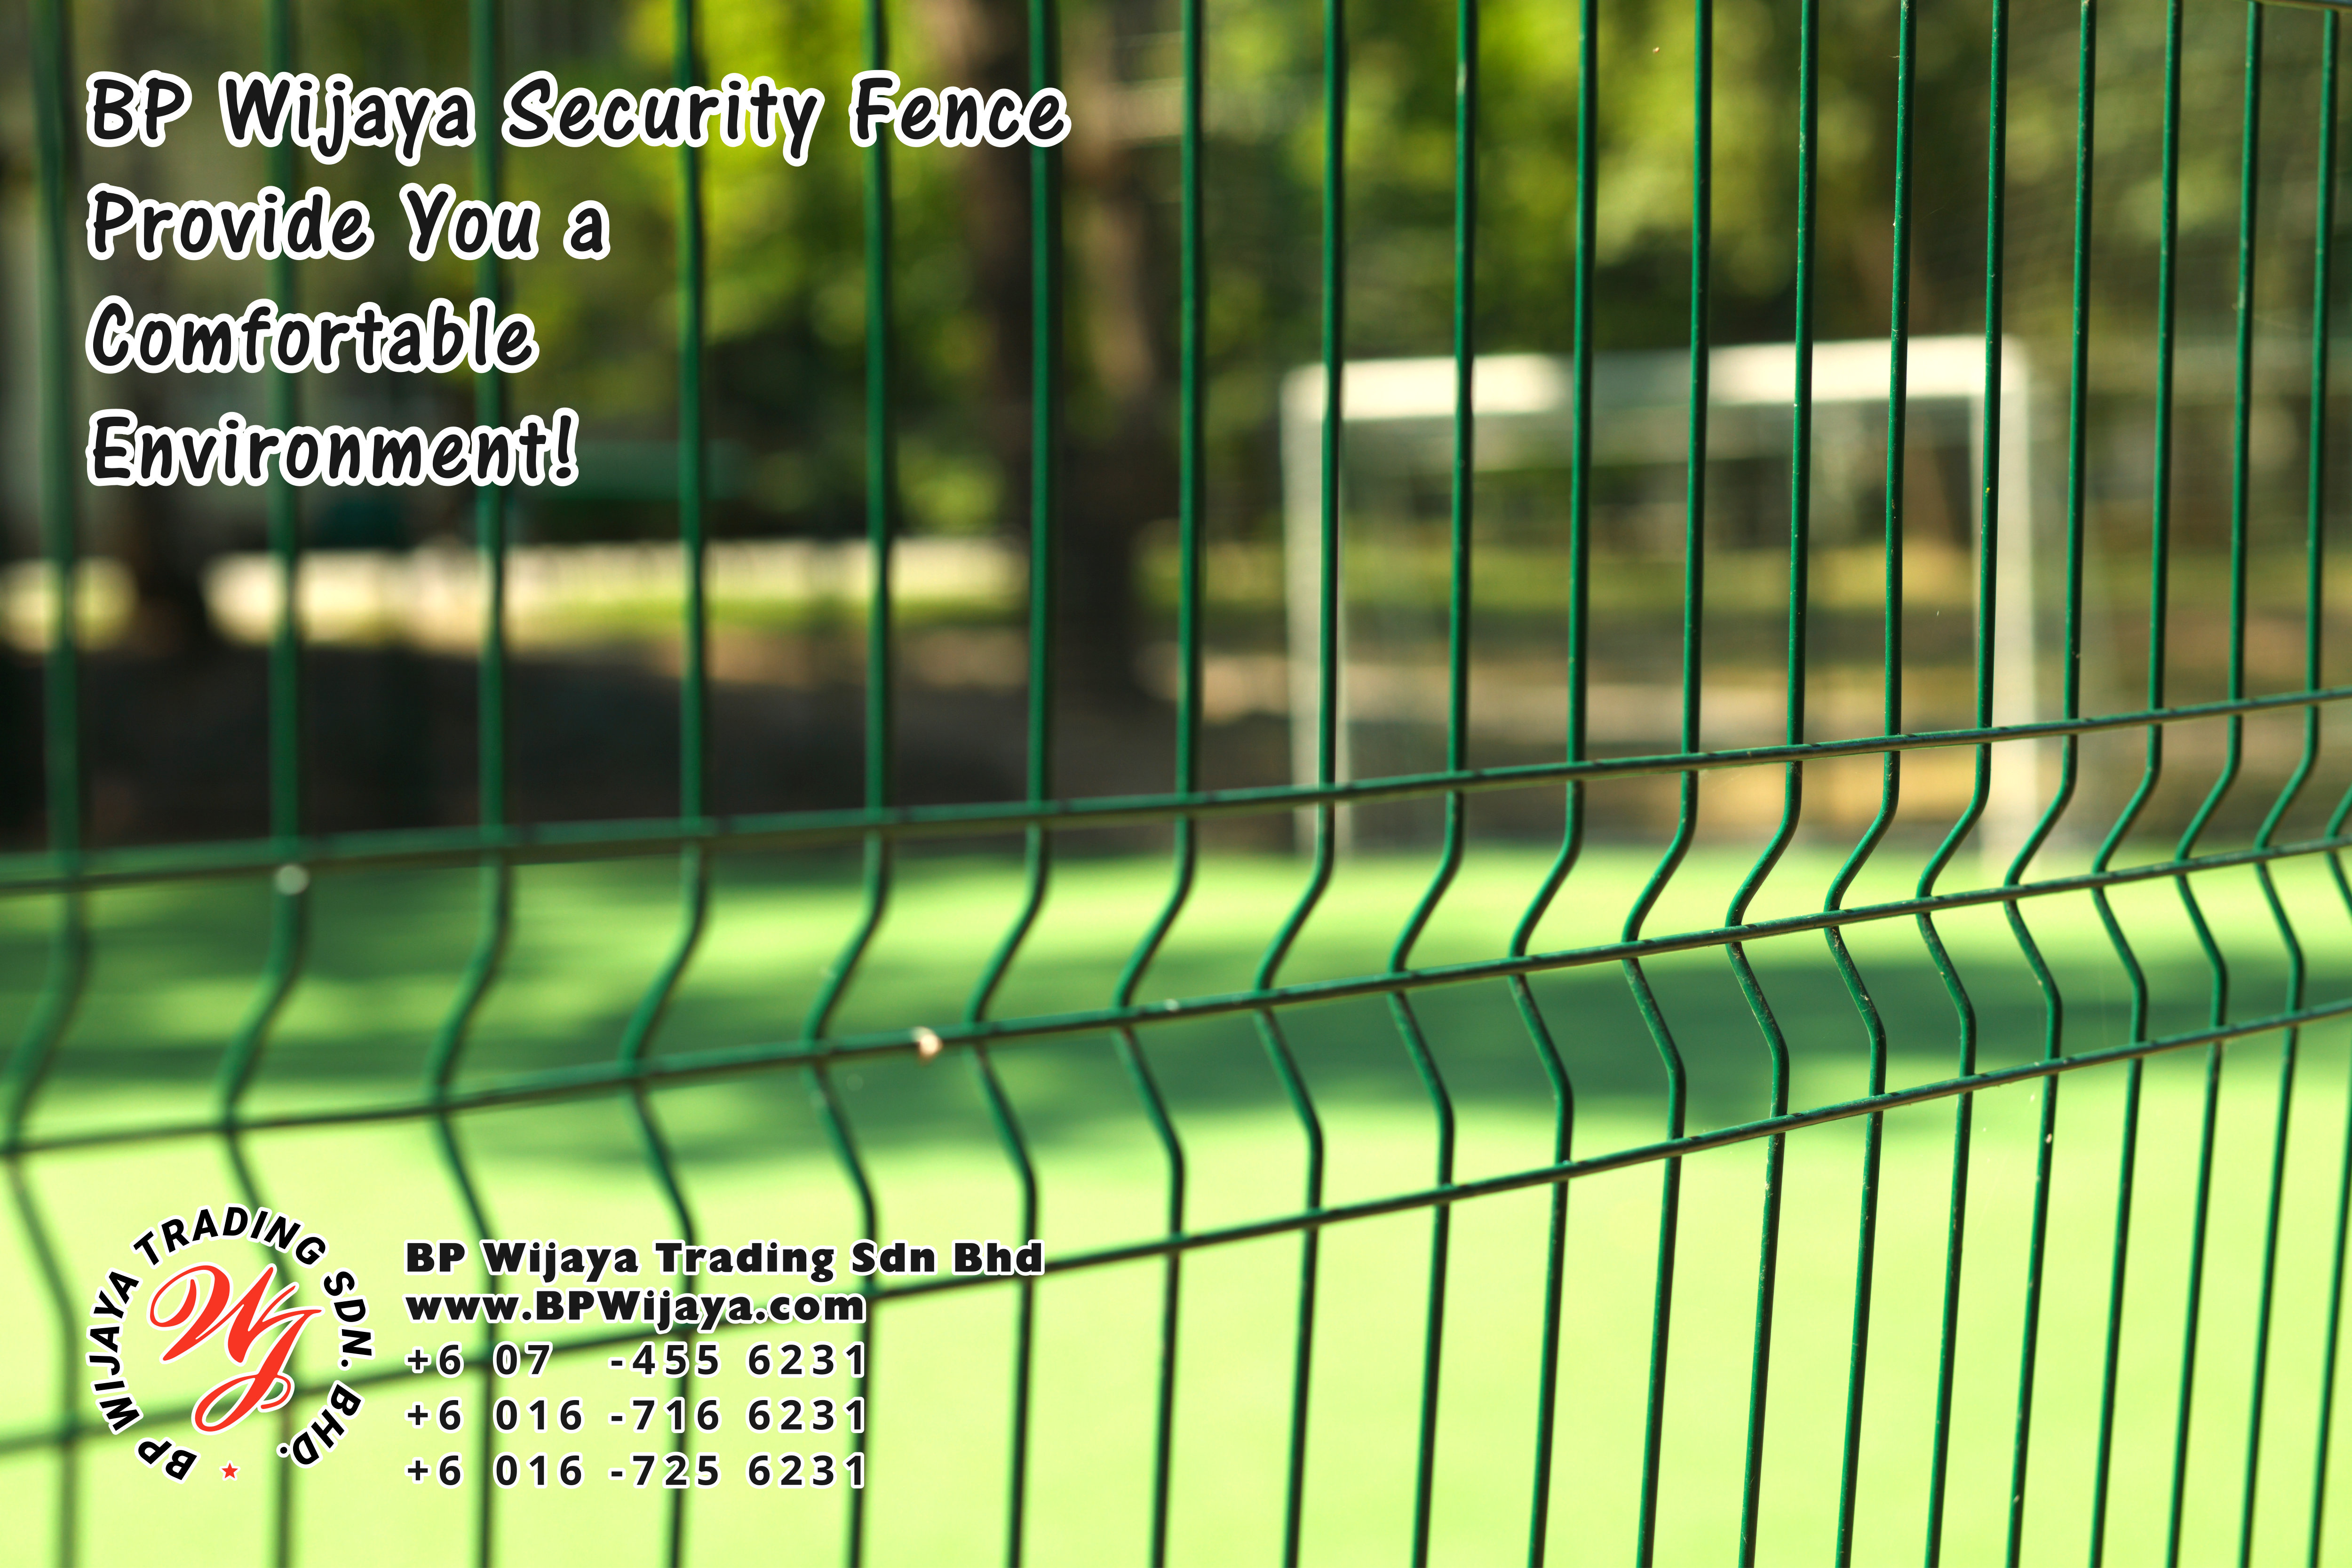 BP Wijaya Trading Sdn Bhd Malaysia Pahang Kuantan Temerloh Mentakab Manufacturer of Safety Fences Building Materials for Housing Construction Site Industial Security Fencing Factory A01-61